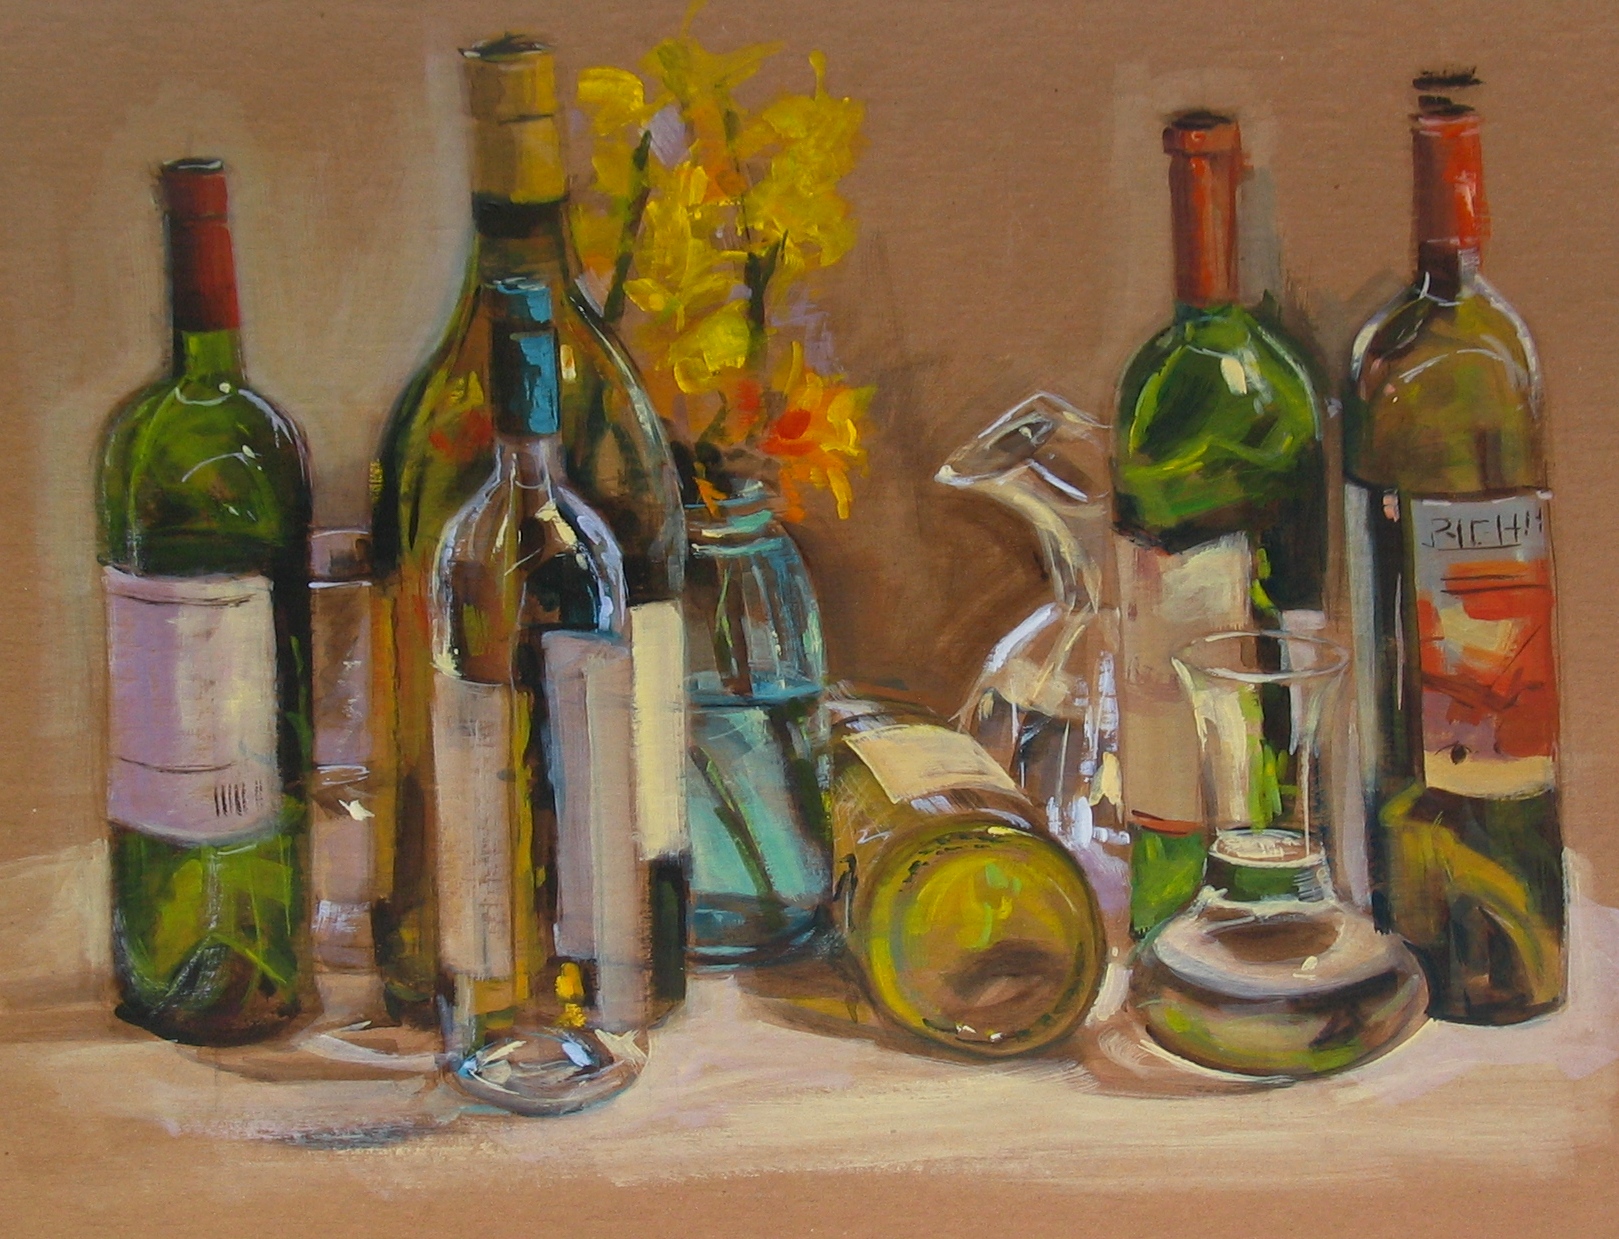 18x24 glass  paint of glass painting Acrylic bottles, about on cardboard, acrylic with demo in.